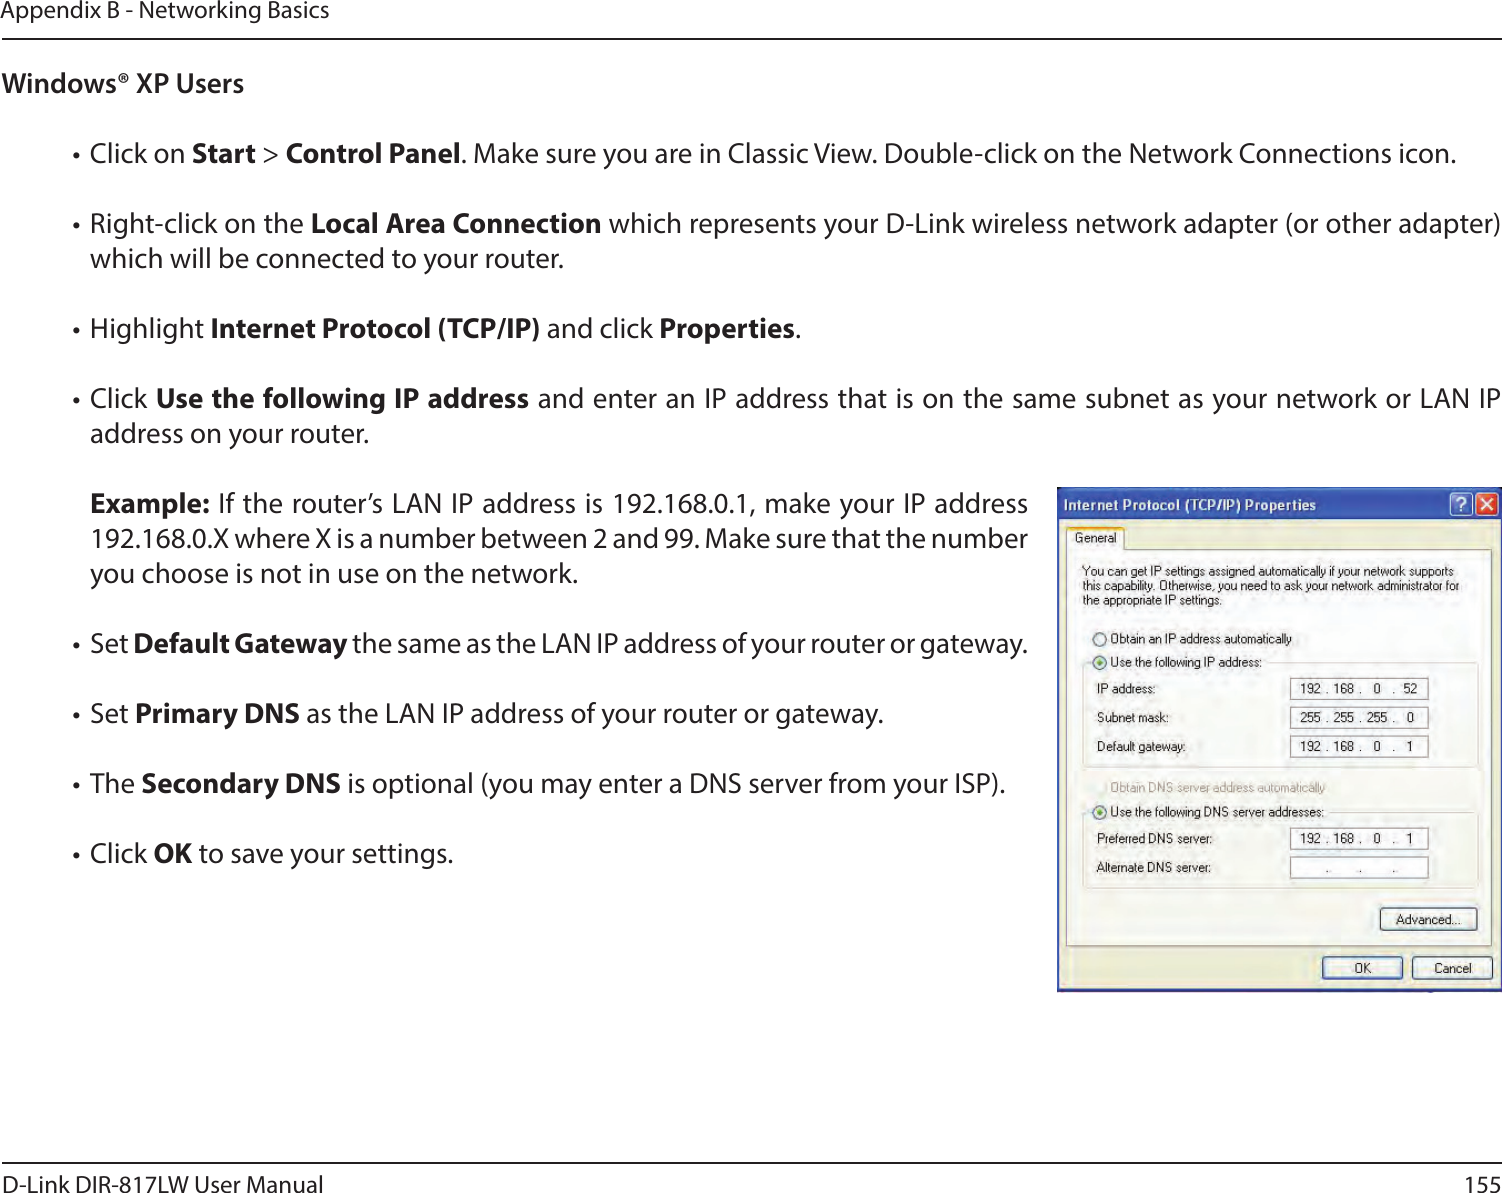 155D-Link DIR-817LW User ManualAppendix B - Networking BasicsWindows® XP Users• Click on Start &gt; Control Panel. Make sure you are in Classic View. Double-click on the Network Connections icon. • Right-click on the Local Area Connection which represents your D-Link wireless network adapter (or other adapter) which will be connected to your router.• Highlight Internet Protocol (TCP/IP) and click Properties.• Click Use the following IP address and enter an IP address that is on the same subnet as your network or LAN IP address on your router. Example: If the router’s LAN IP address is 192.168.0.1, make your IP address 192.168.0.X where X is a number between 2 and 99. Make sure that the number you choose is not in use on the network. • Set Default Gateway the same as the LAN IP address of your router or gateway.• Set Primary DNS as the LAN IP address of your router or gateway. • The Secondary DNS is optional (you may enter a DNS server from your ISP).• Click OK to save your settings.